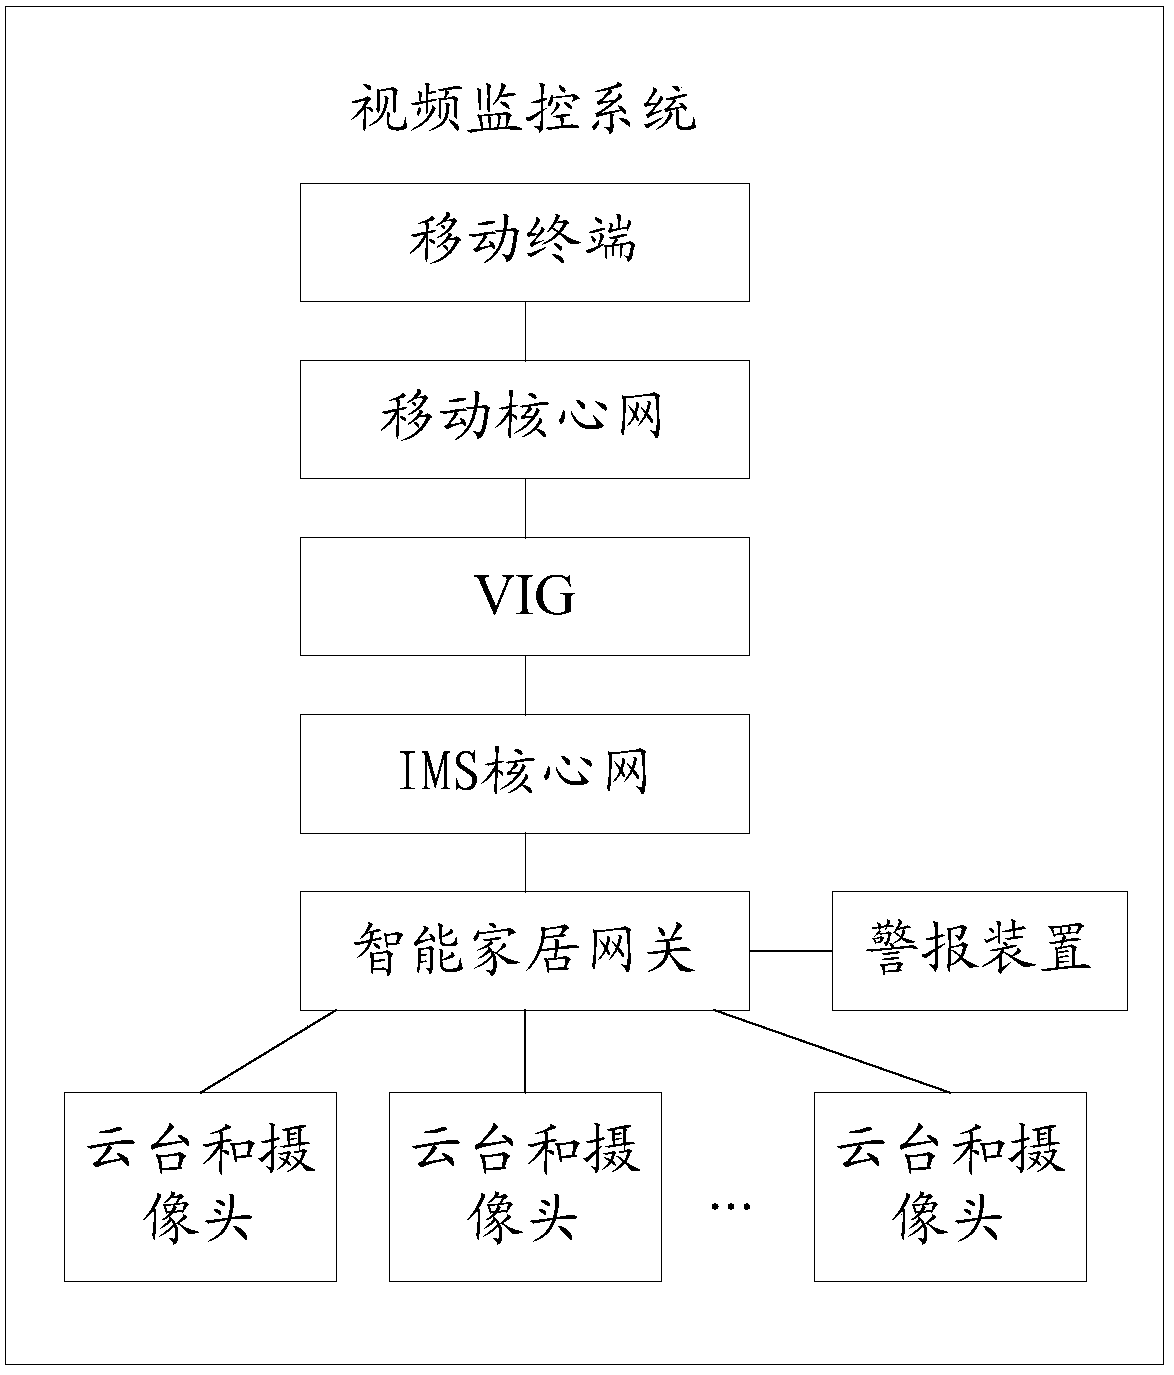 Method and system for video surveillance